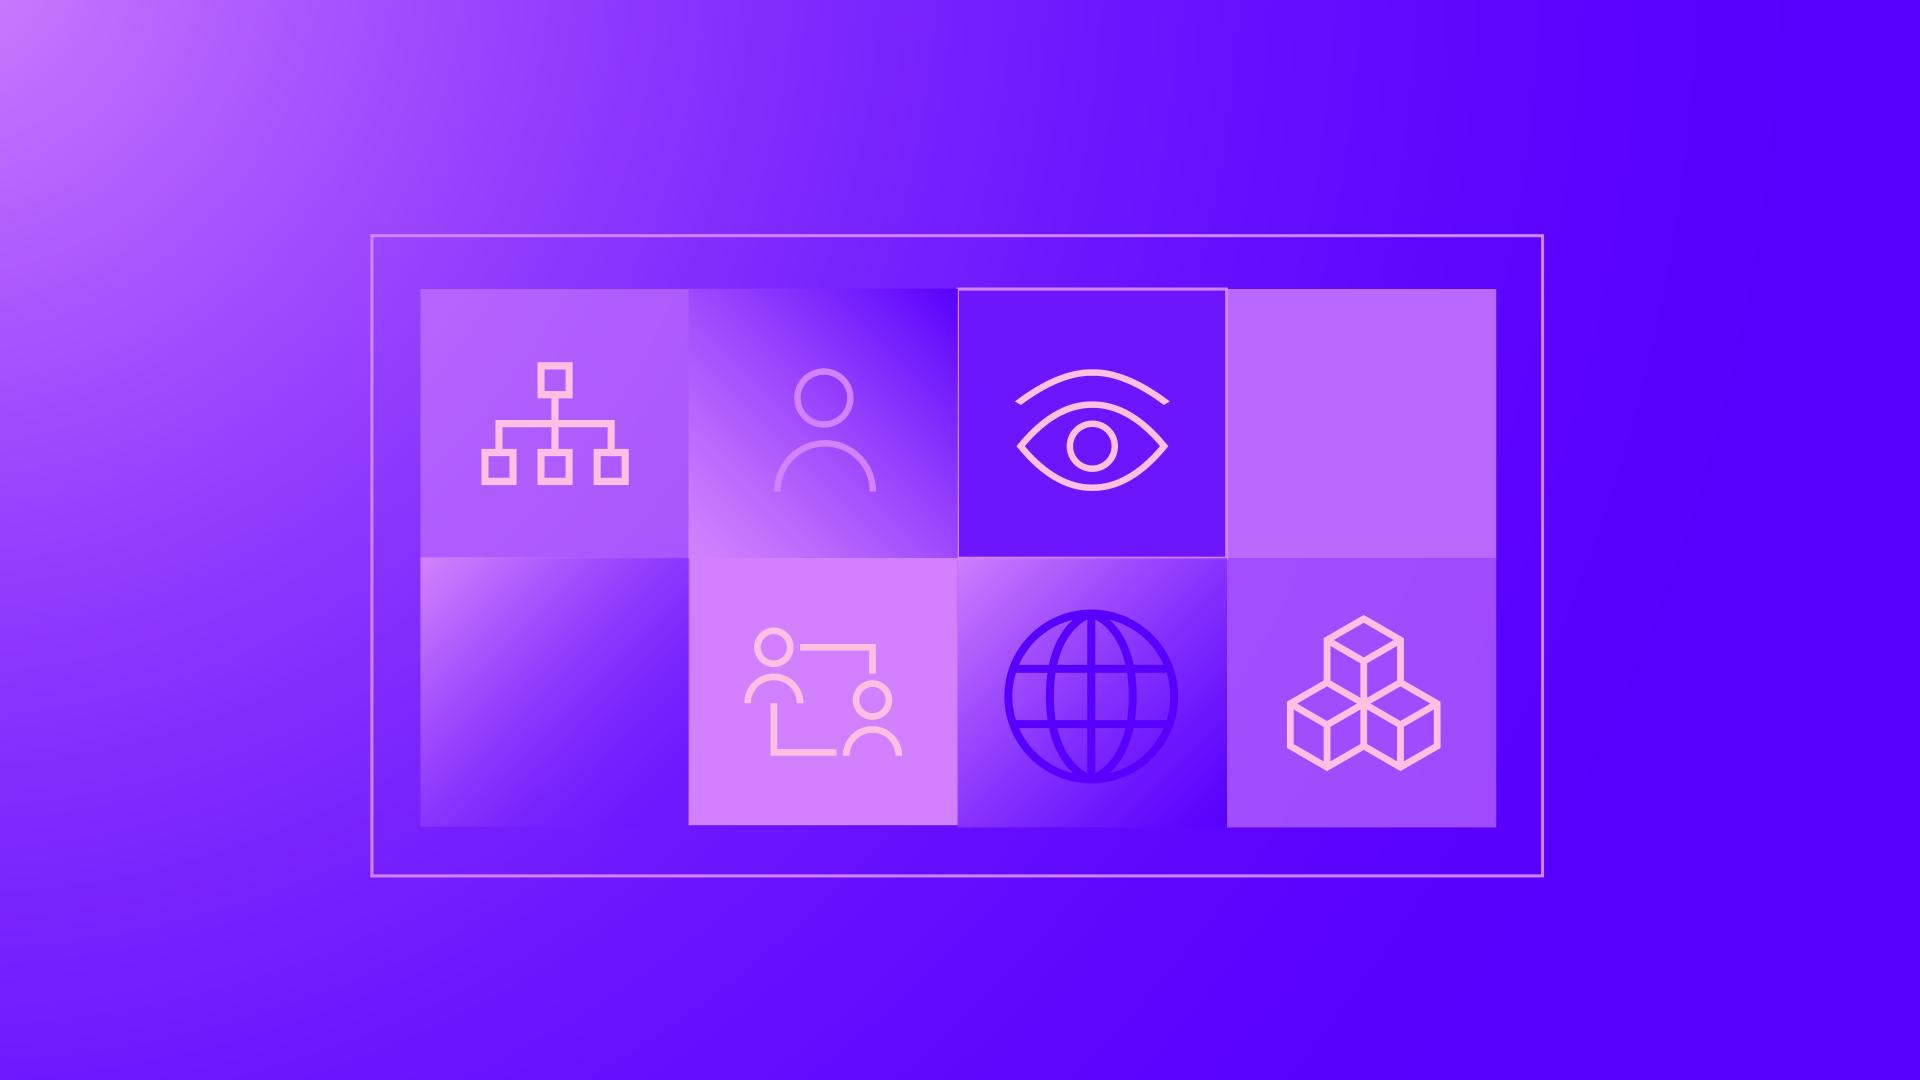 A monochromatic purple digital rendering containing a two by eight grid of Datadog icons placed in the center. The icons include symbols that resemble an eye, building blocks, and networks.